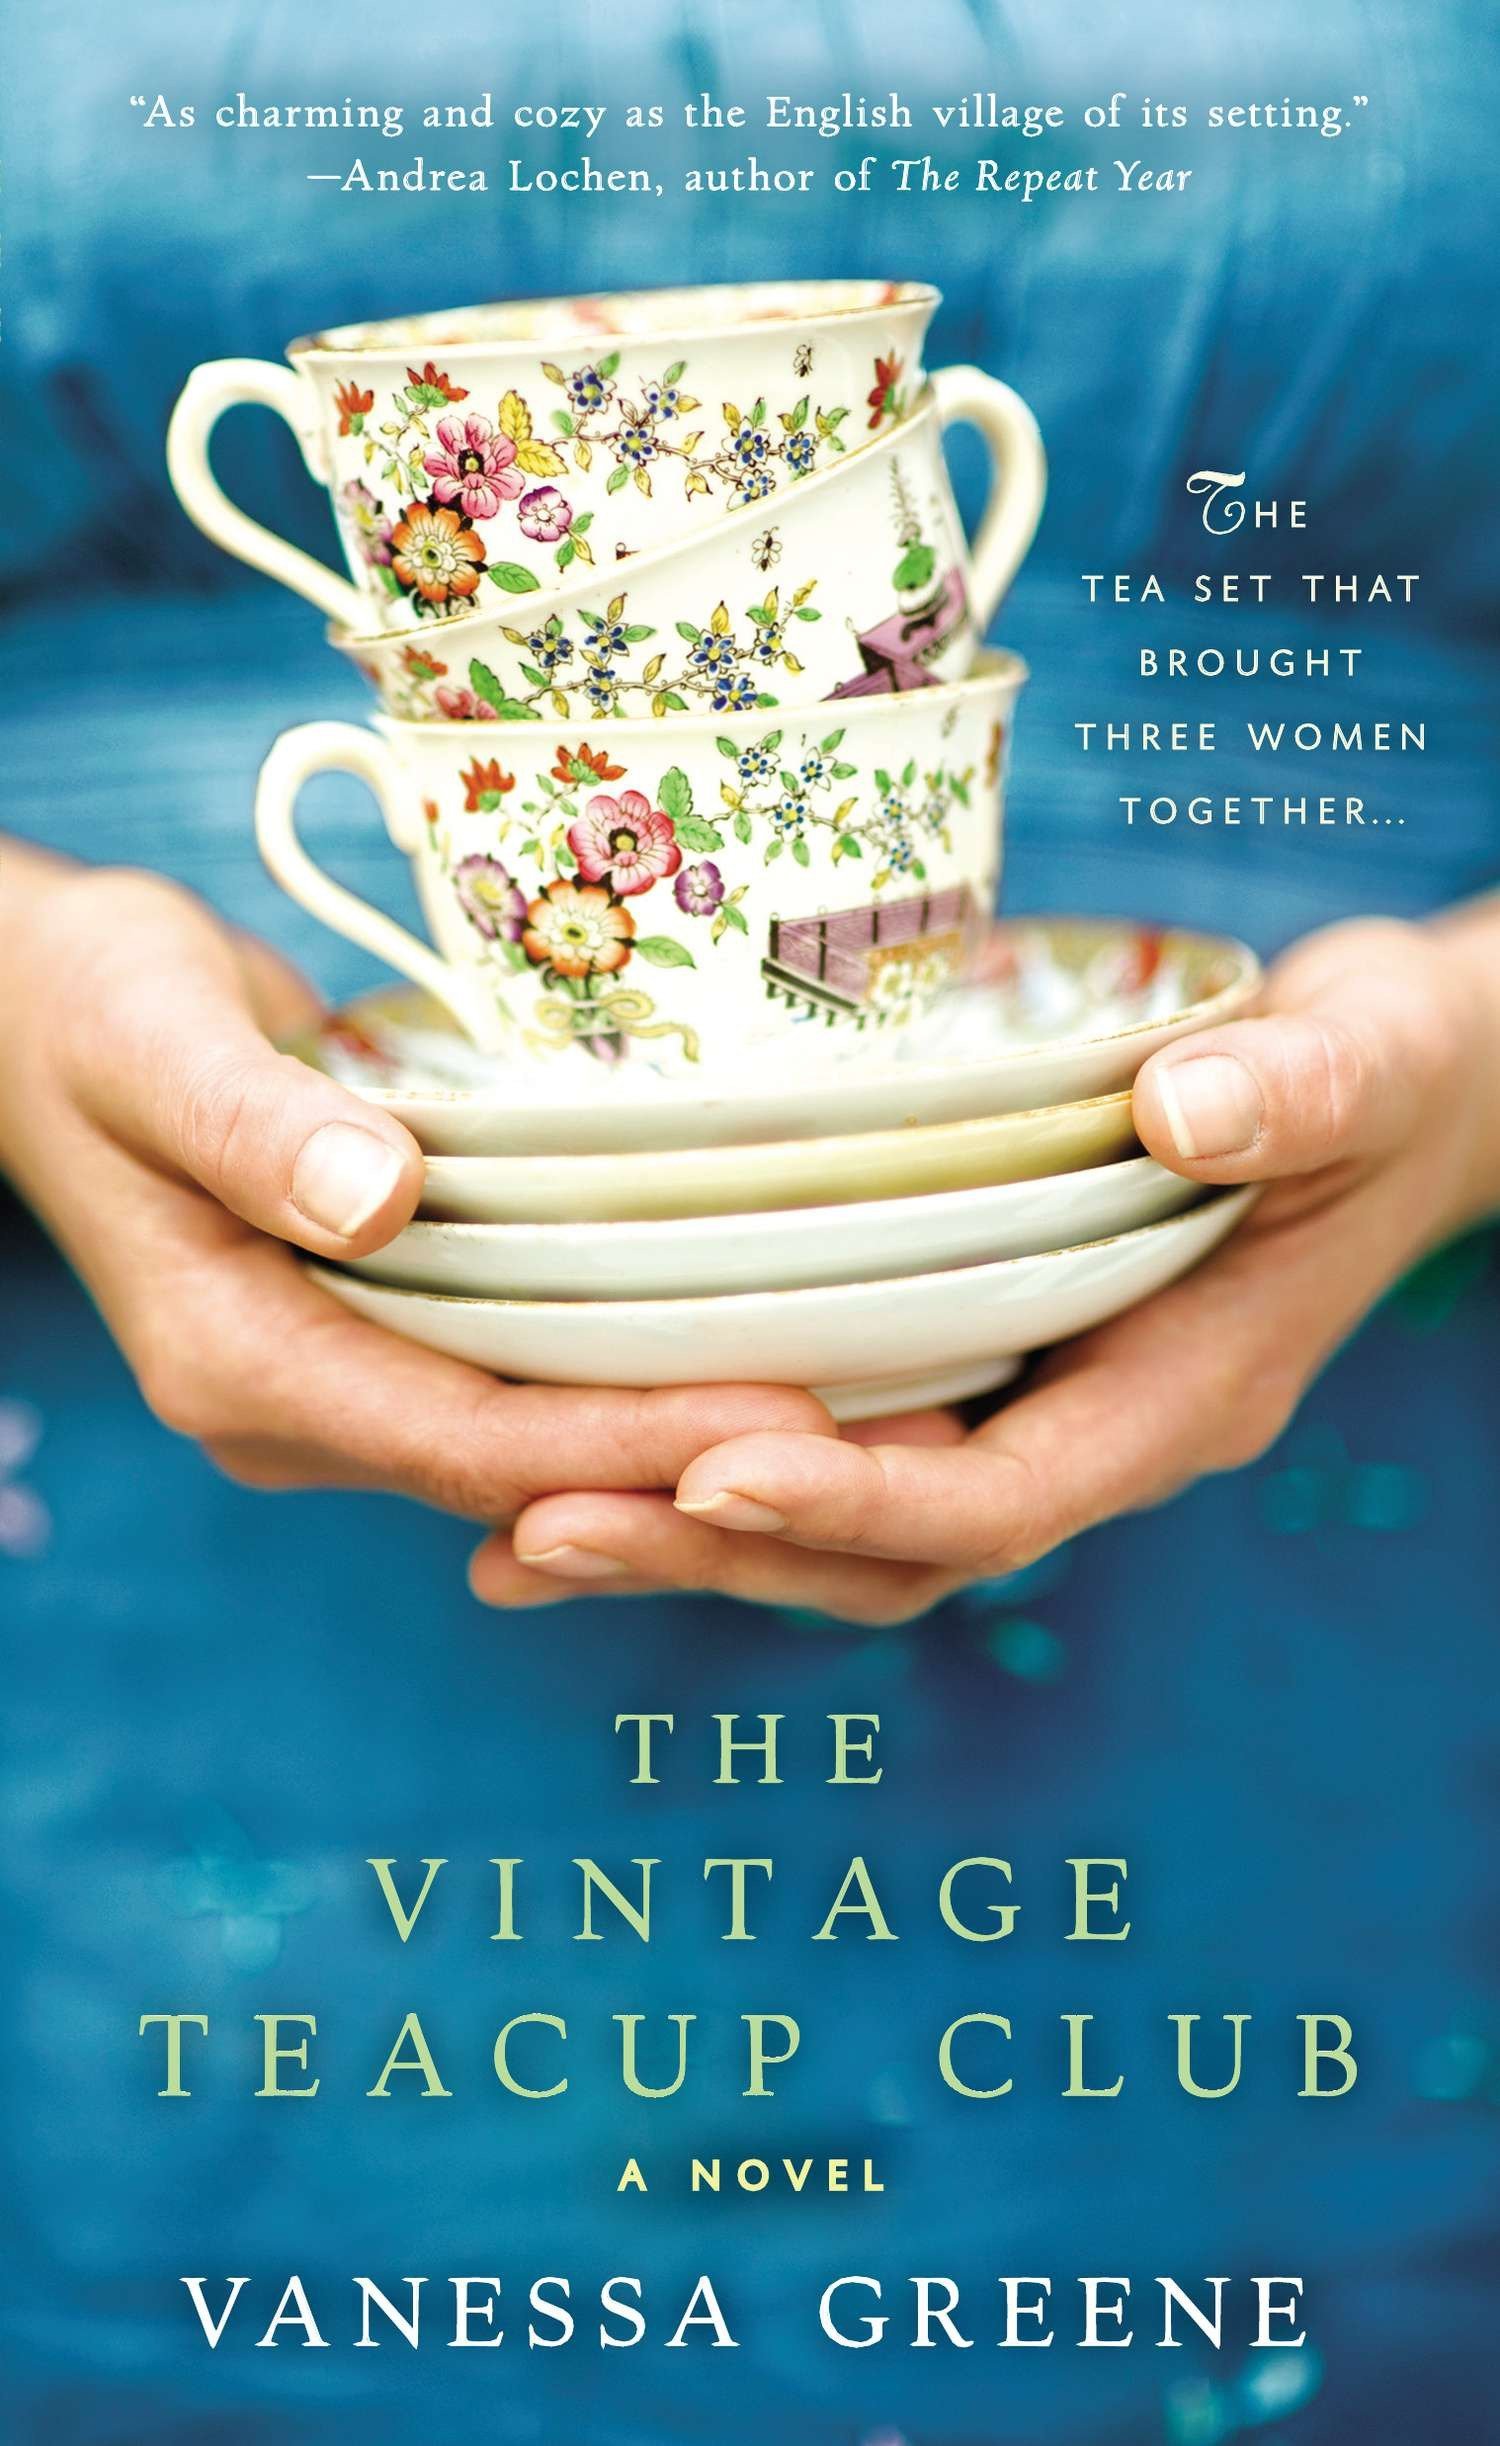 Image for "The Vintage Teacup Club"